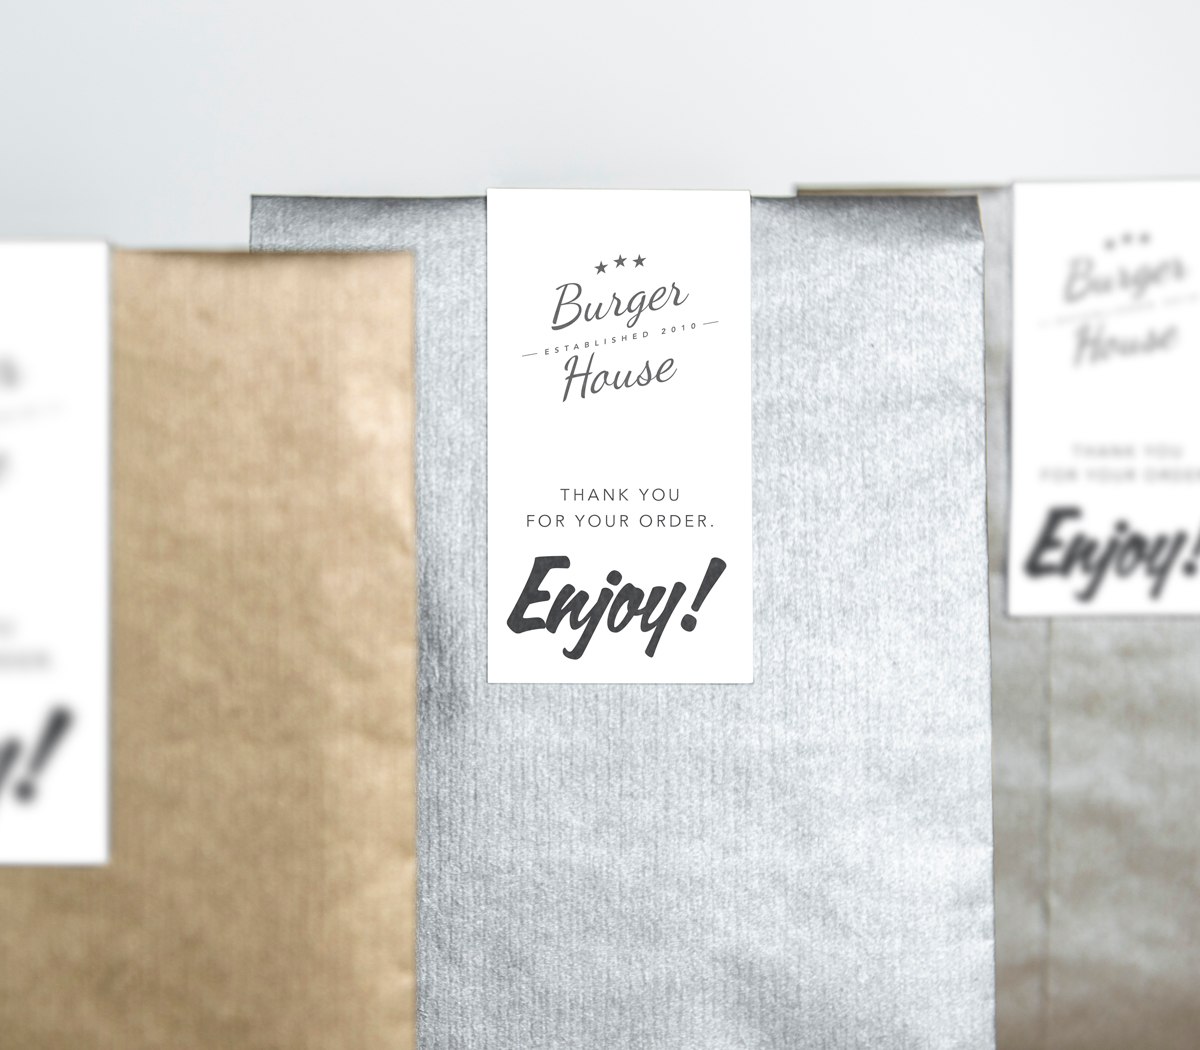 Different paper Cut Sheet Labels on the takeout bags as an example of branding.